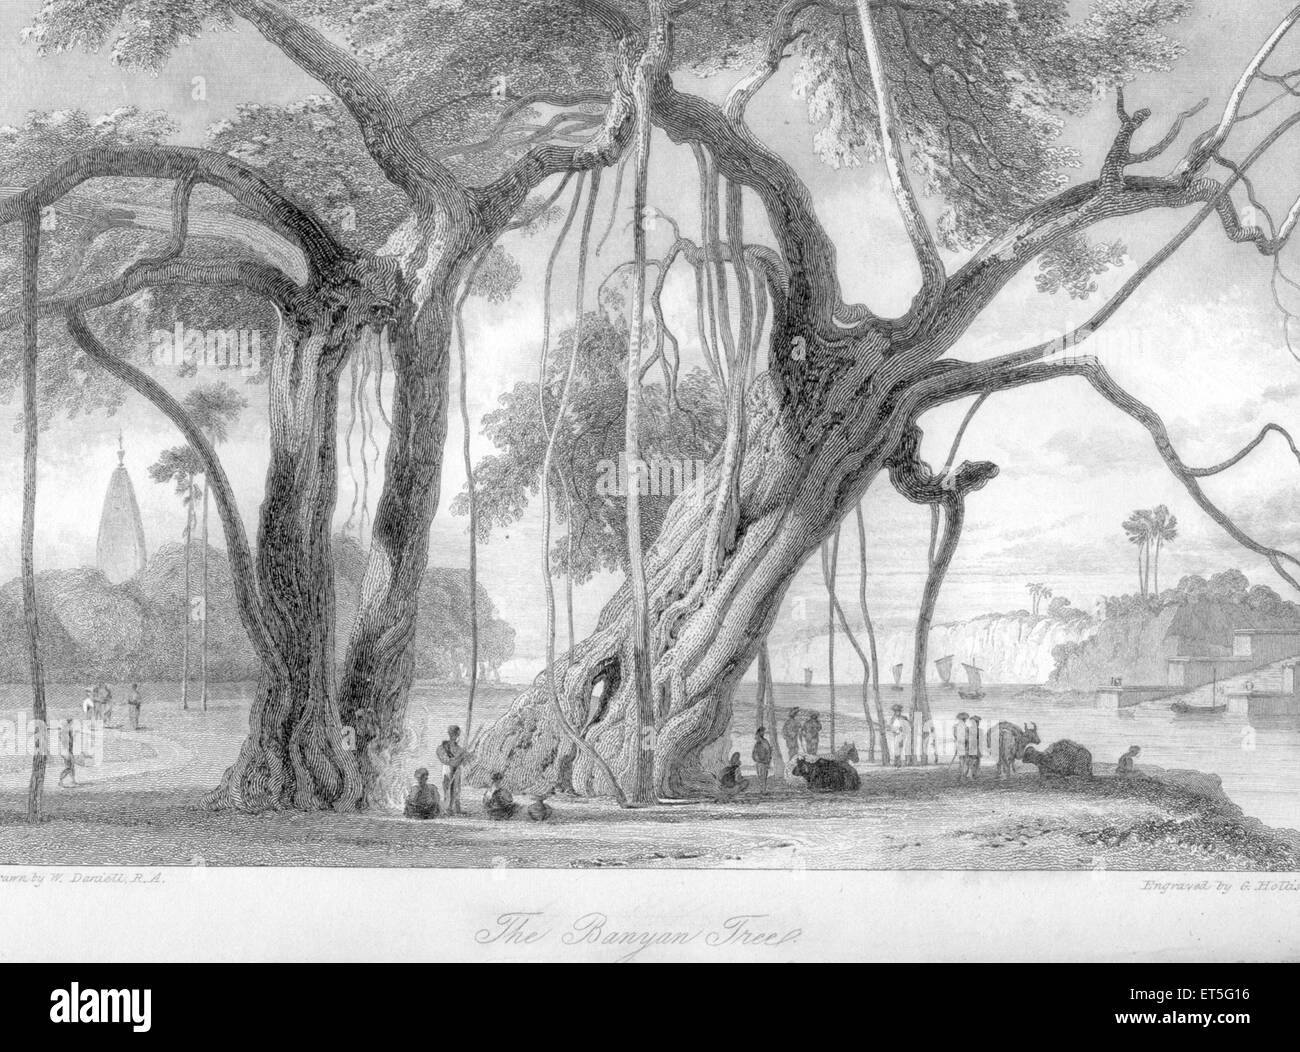 Banyan Trees, India, Asia, Asian, Indian, old vintage 1800s steel engraving Stock Photo